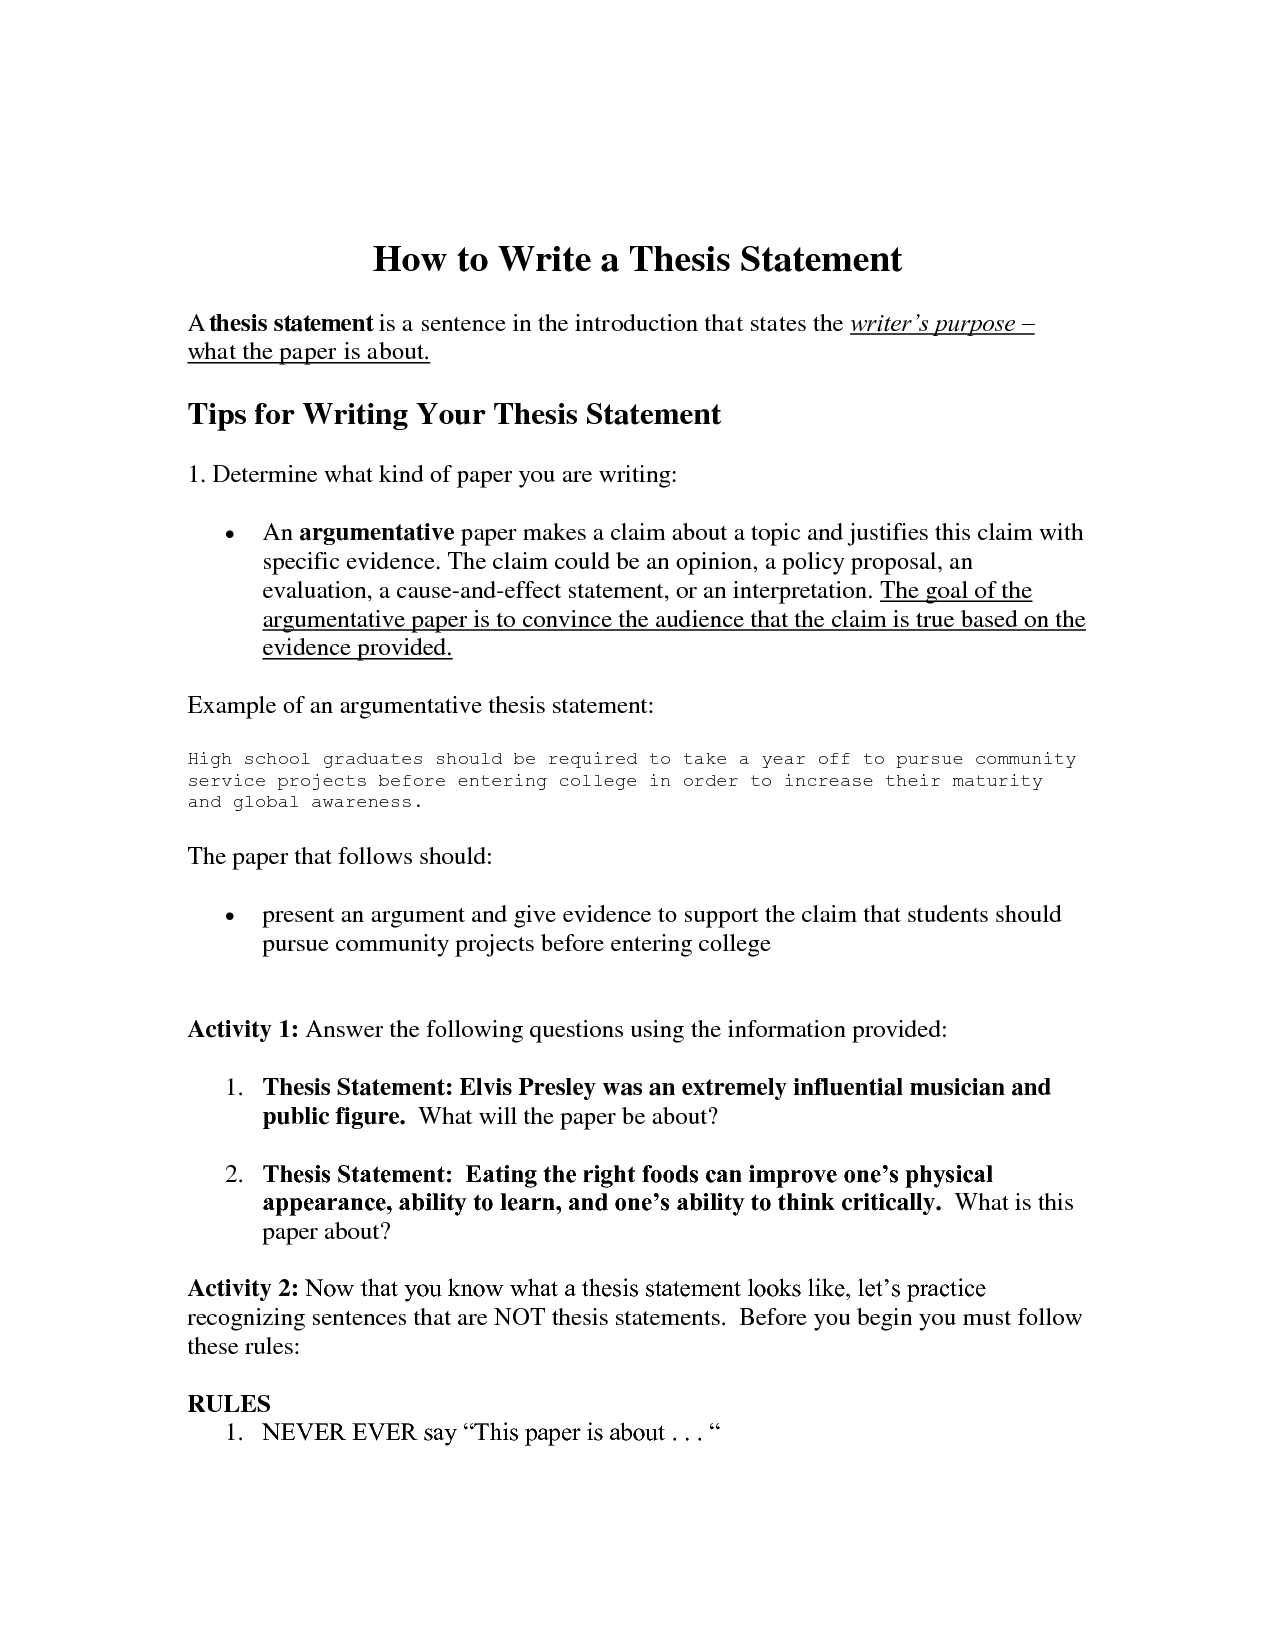 Developing a thesis statement worksheet